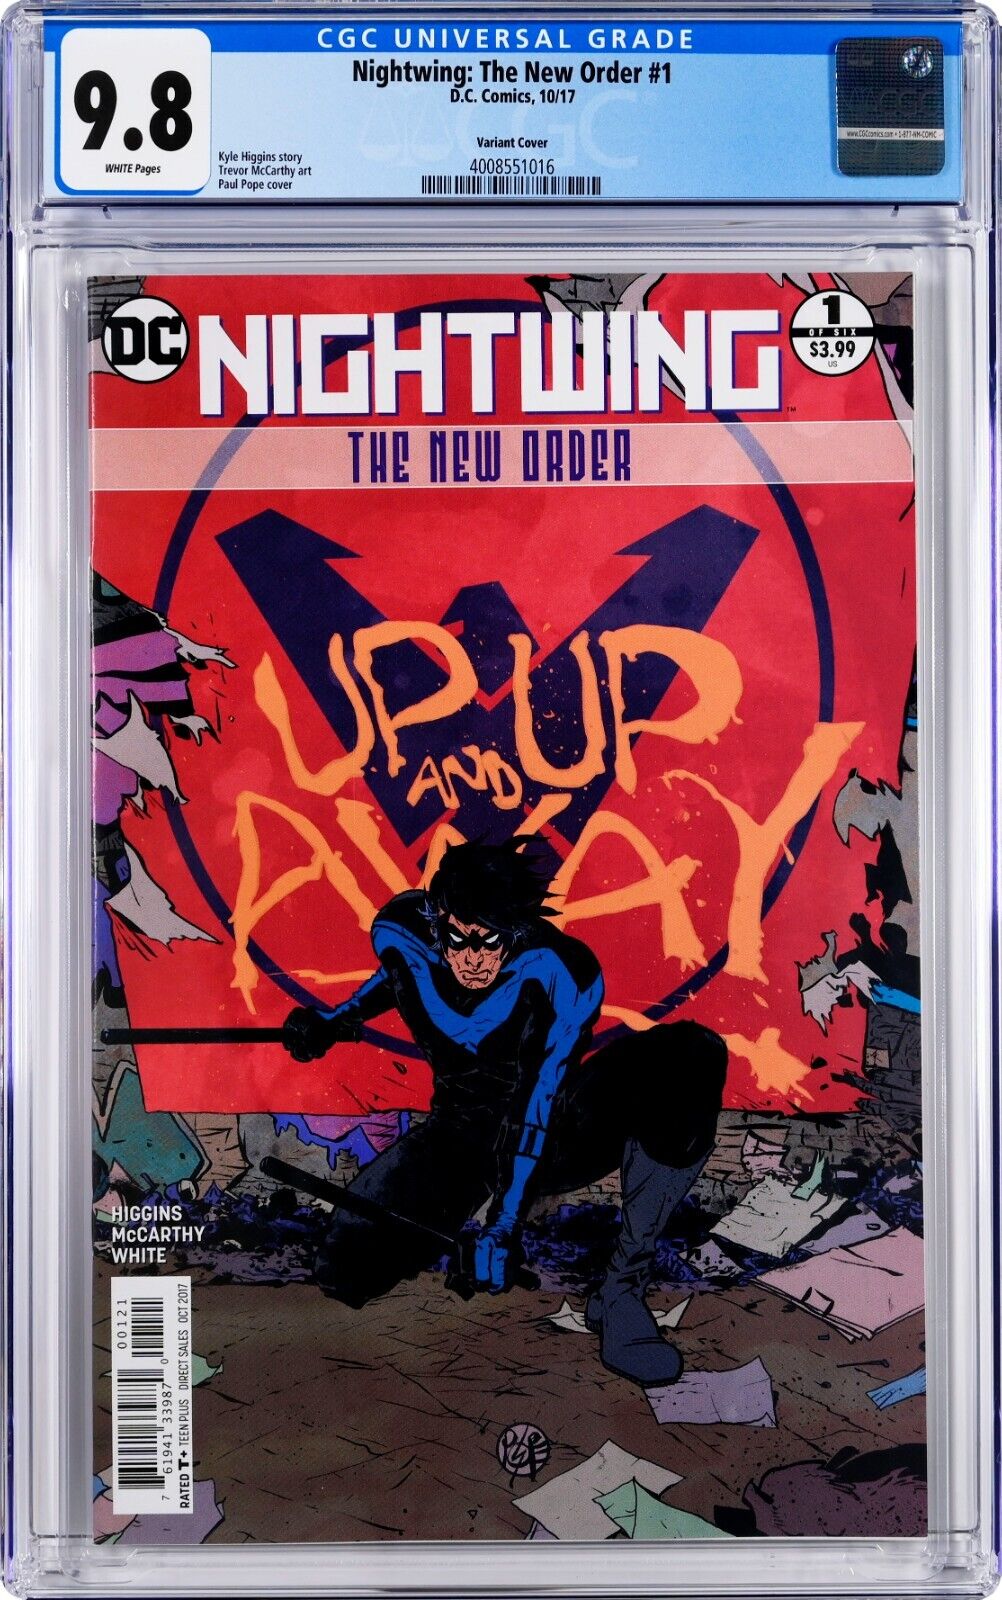 Nightwing: The New Order #1 CGC 9.8 (Oct 2017, DC) Paul Pope Variant Cover